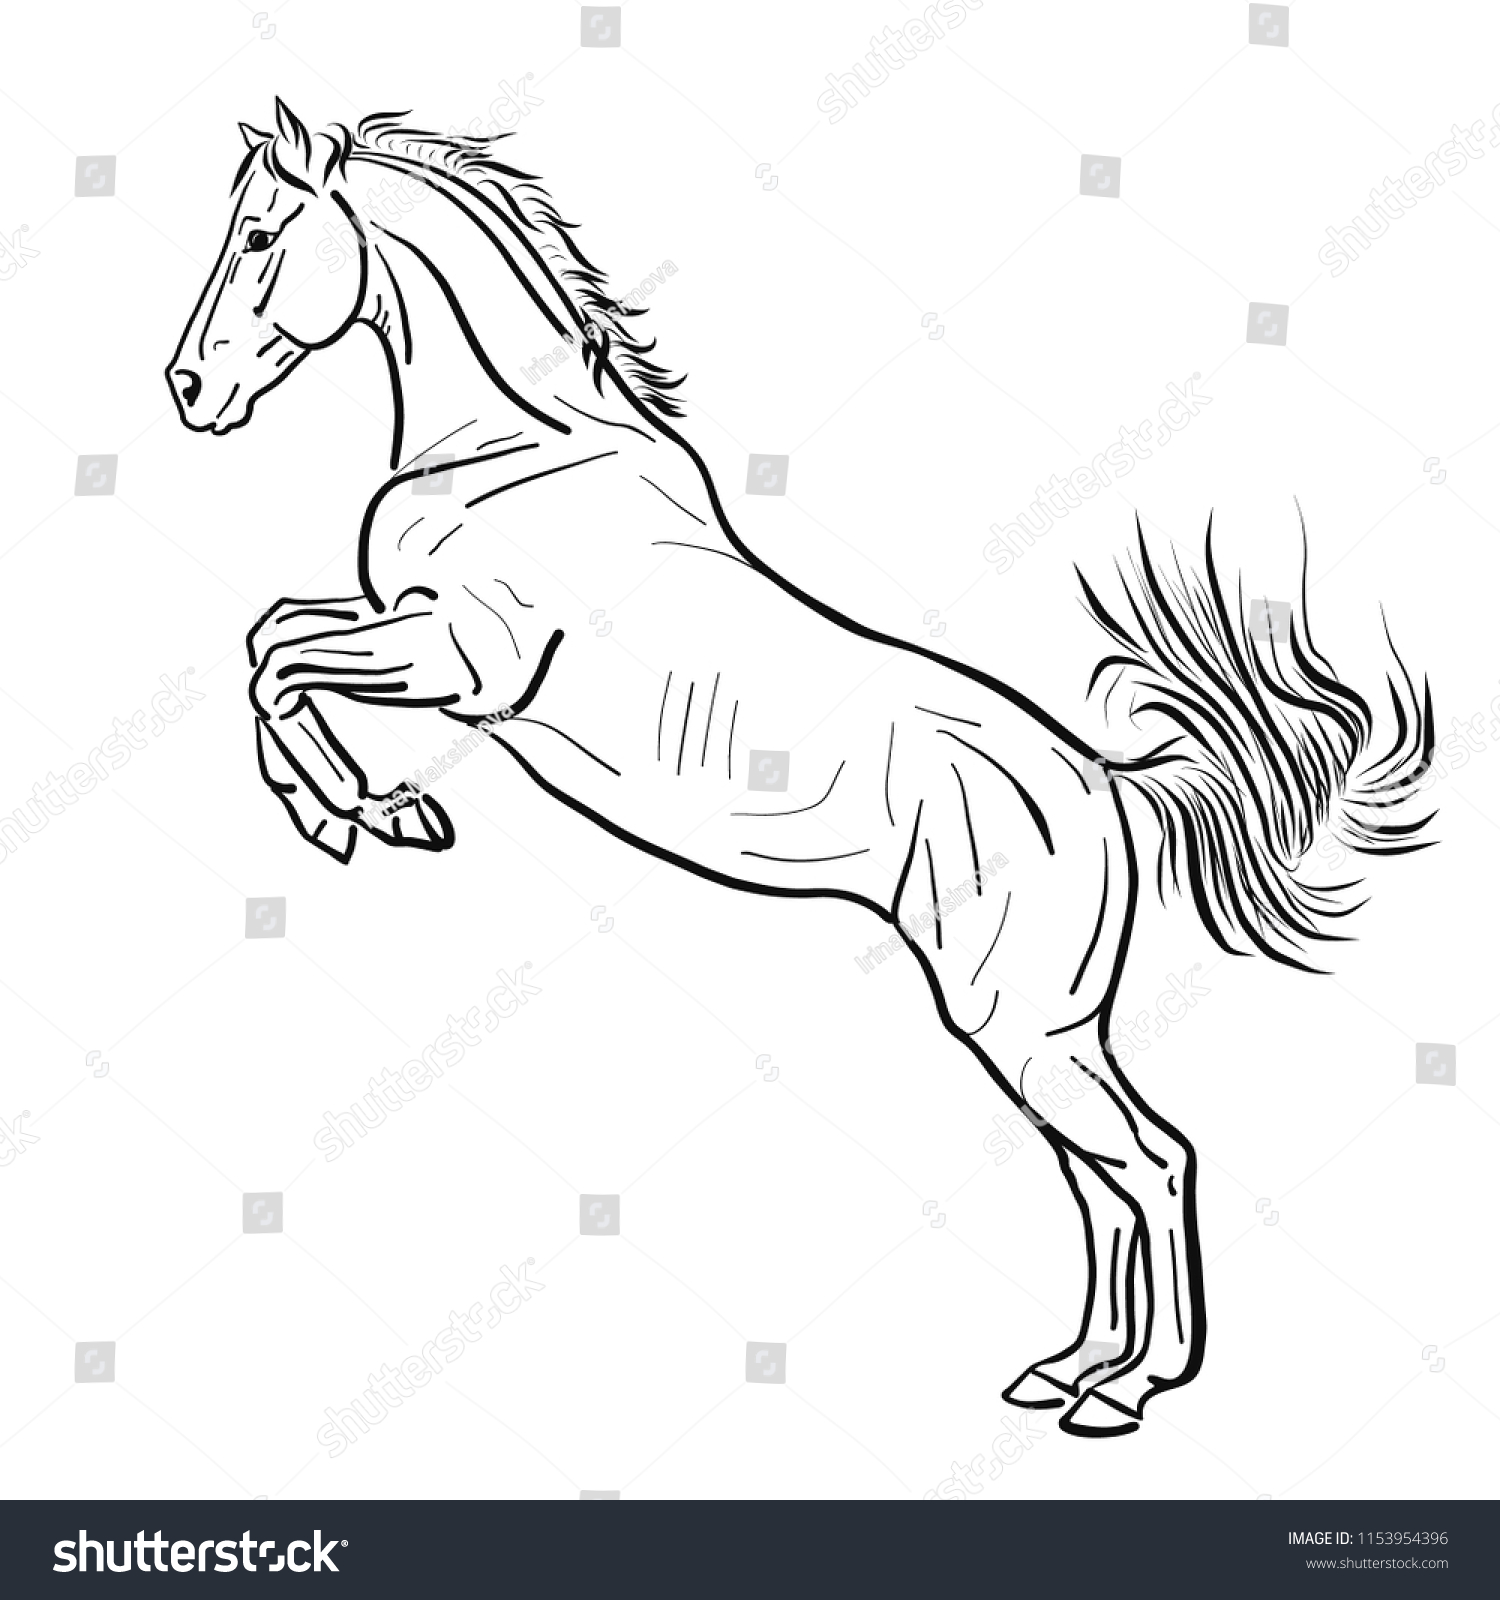 Sketch Horse Standing On Hind Legs Stock Vector (Royalty Free) 1153954396